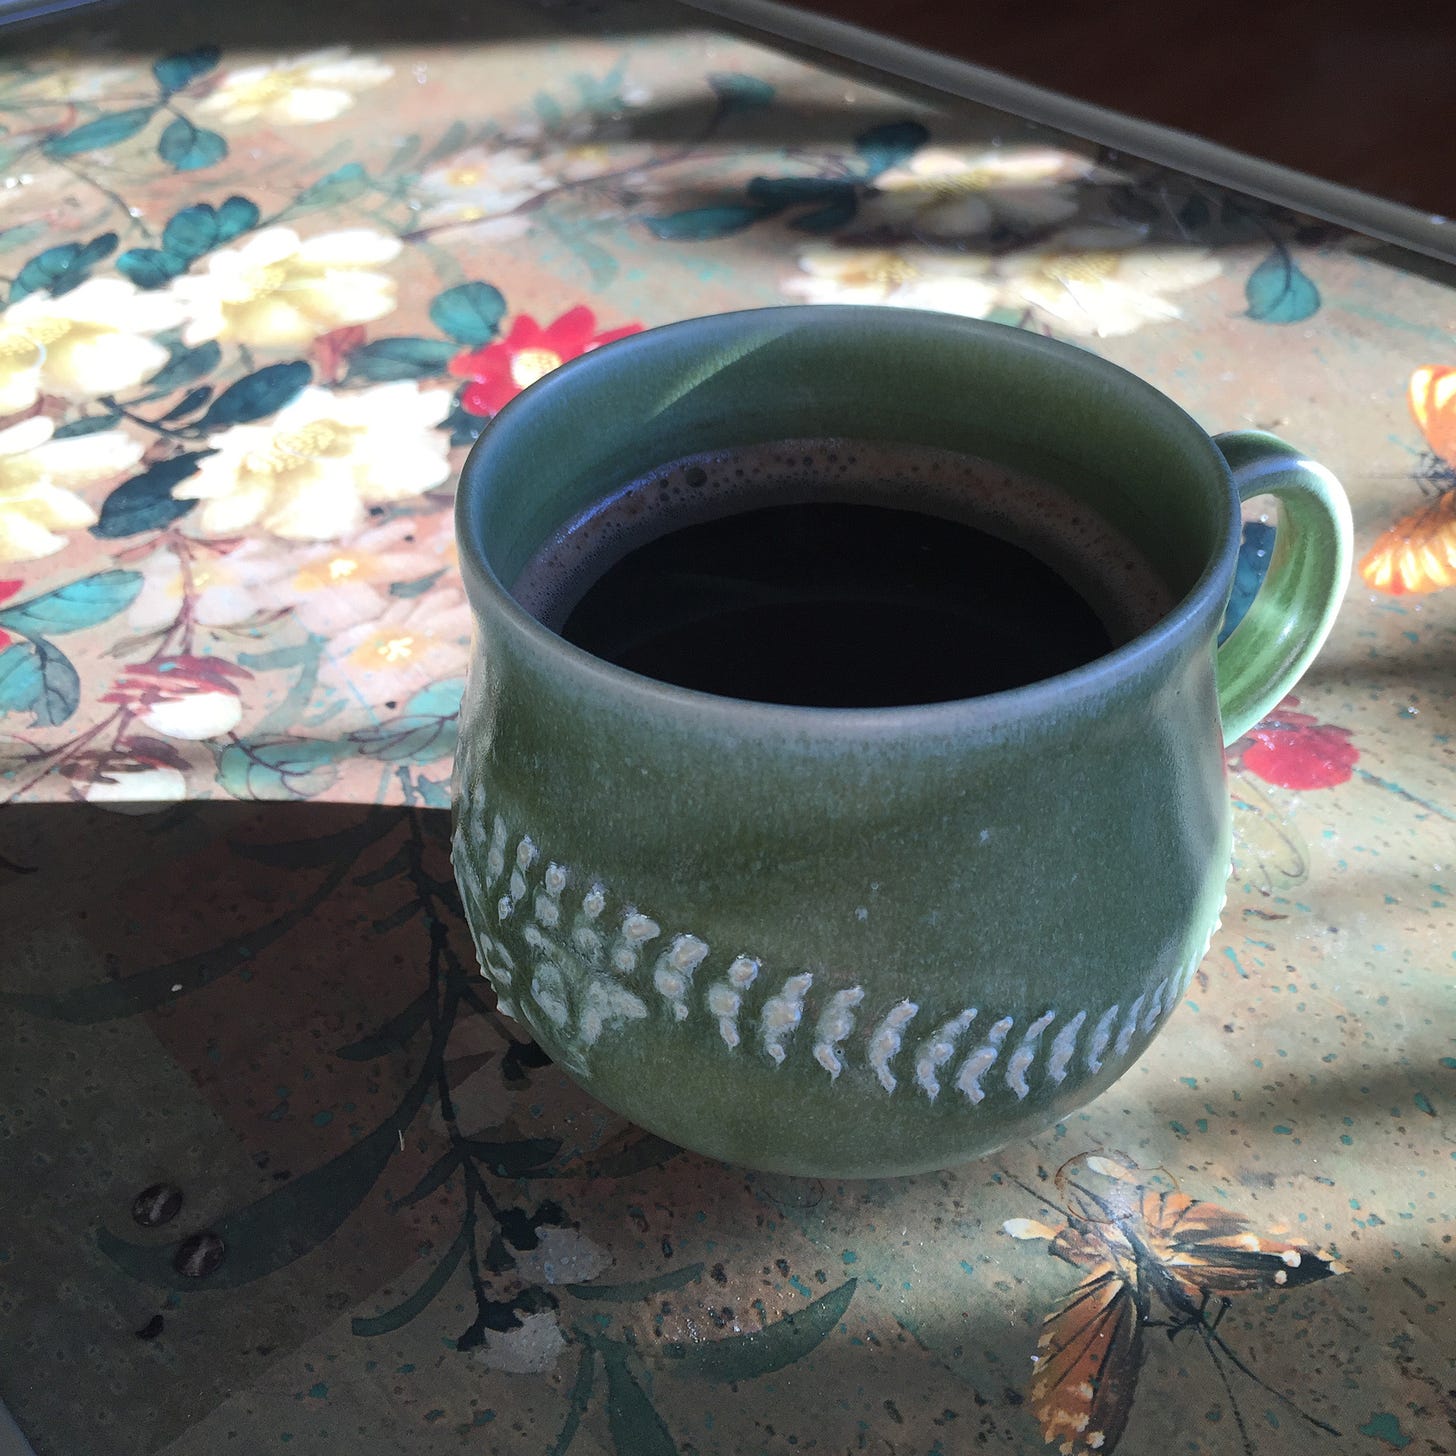 On an old-fashioned tv tray patterned with flours and butterfliers, a teal green mug full of coffee sits in sunlight and casts a shadow to its left. A bone design is embossed on the mug.